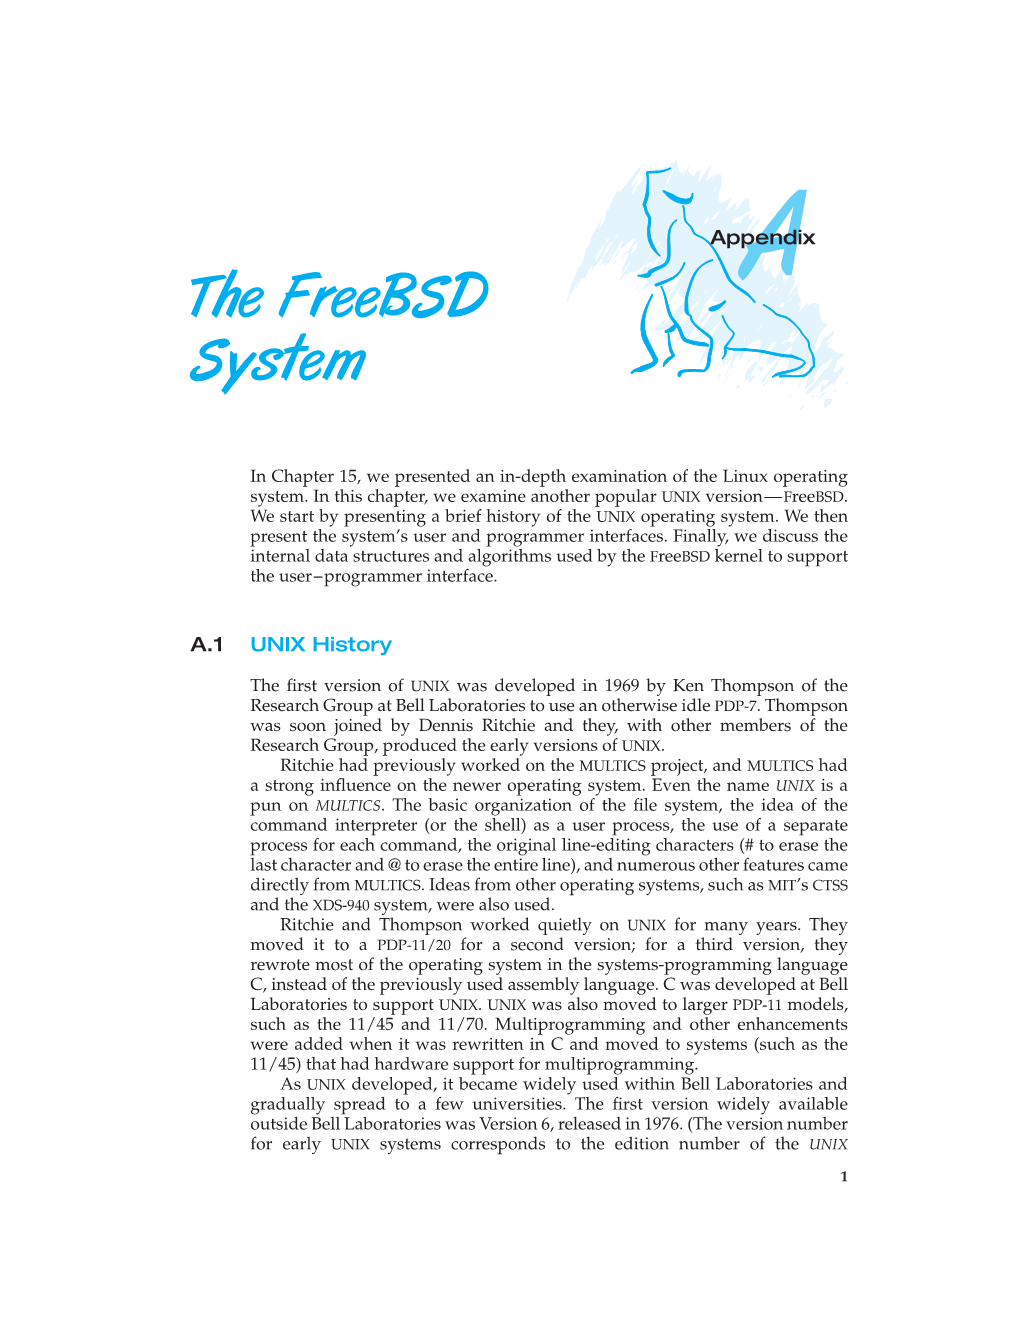 The Freebsd System